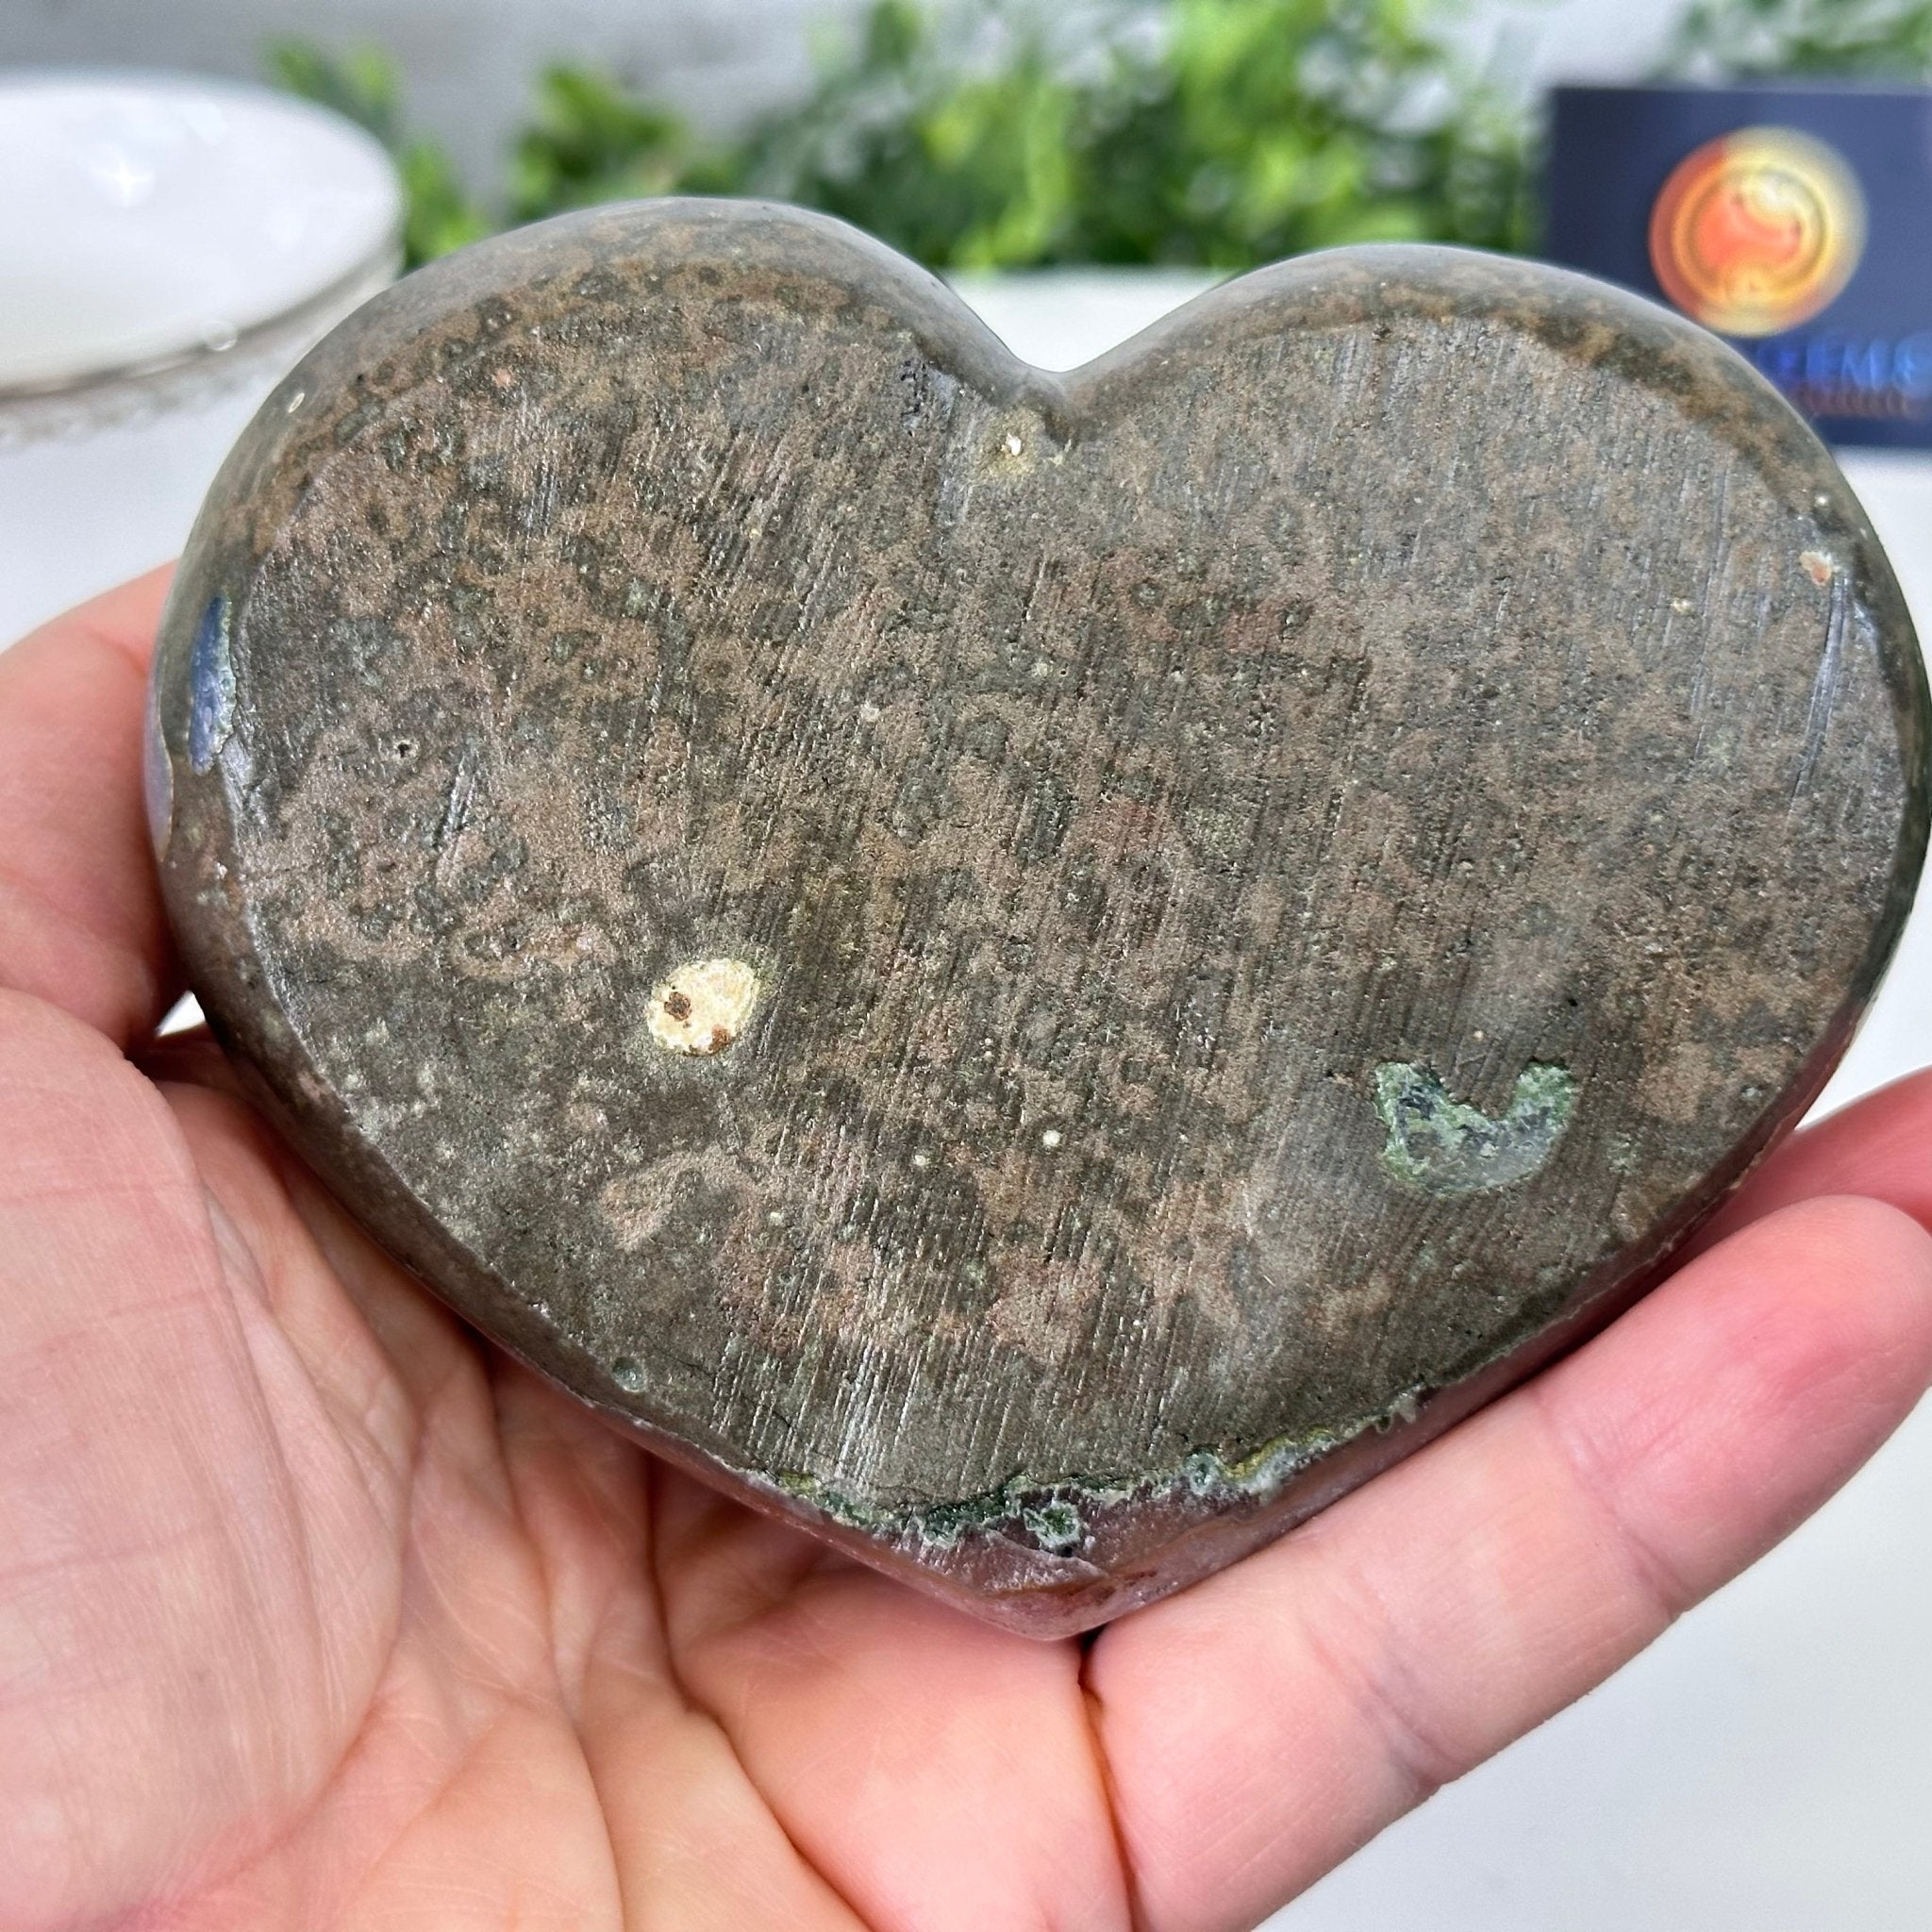 Extra Quality Amethyst Heart Geode on an Acrylic Stand, 0.91 lbs & 2.7" Tall #5462-0051 by Brazil Gems - Brazil GemsBrazil GemsExtra Quality Amethyst Heart Geode on an Acrylic Stand, 0.91 lbs & 2.7" Tall #5462-0051 by Brazil GemsHearts5462-0051